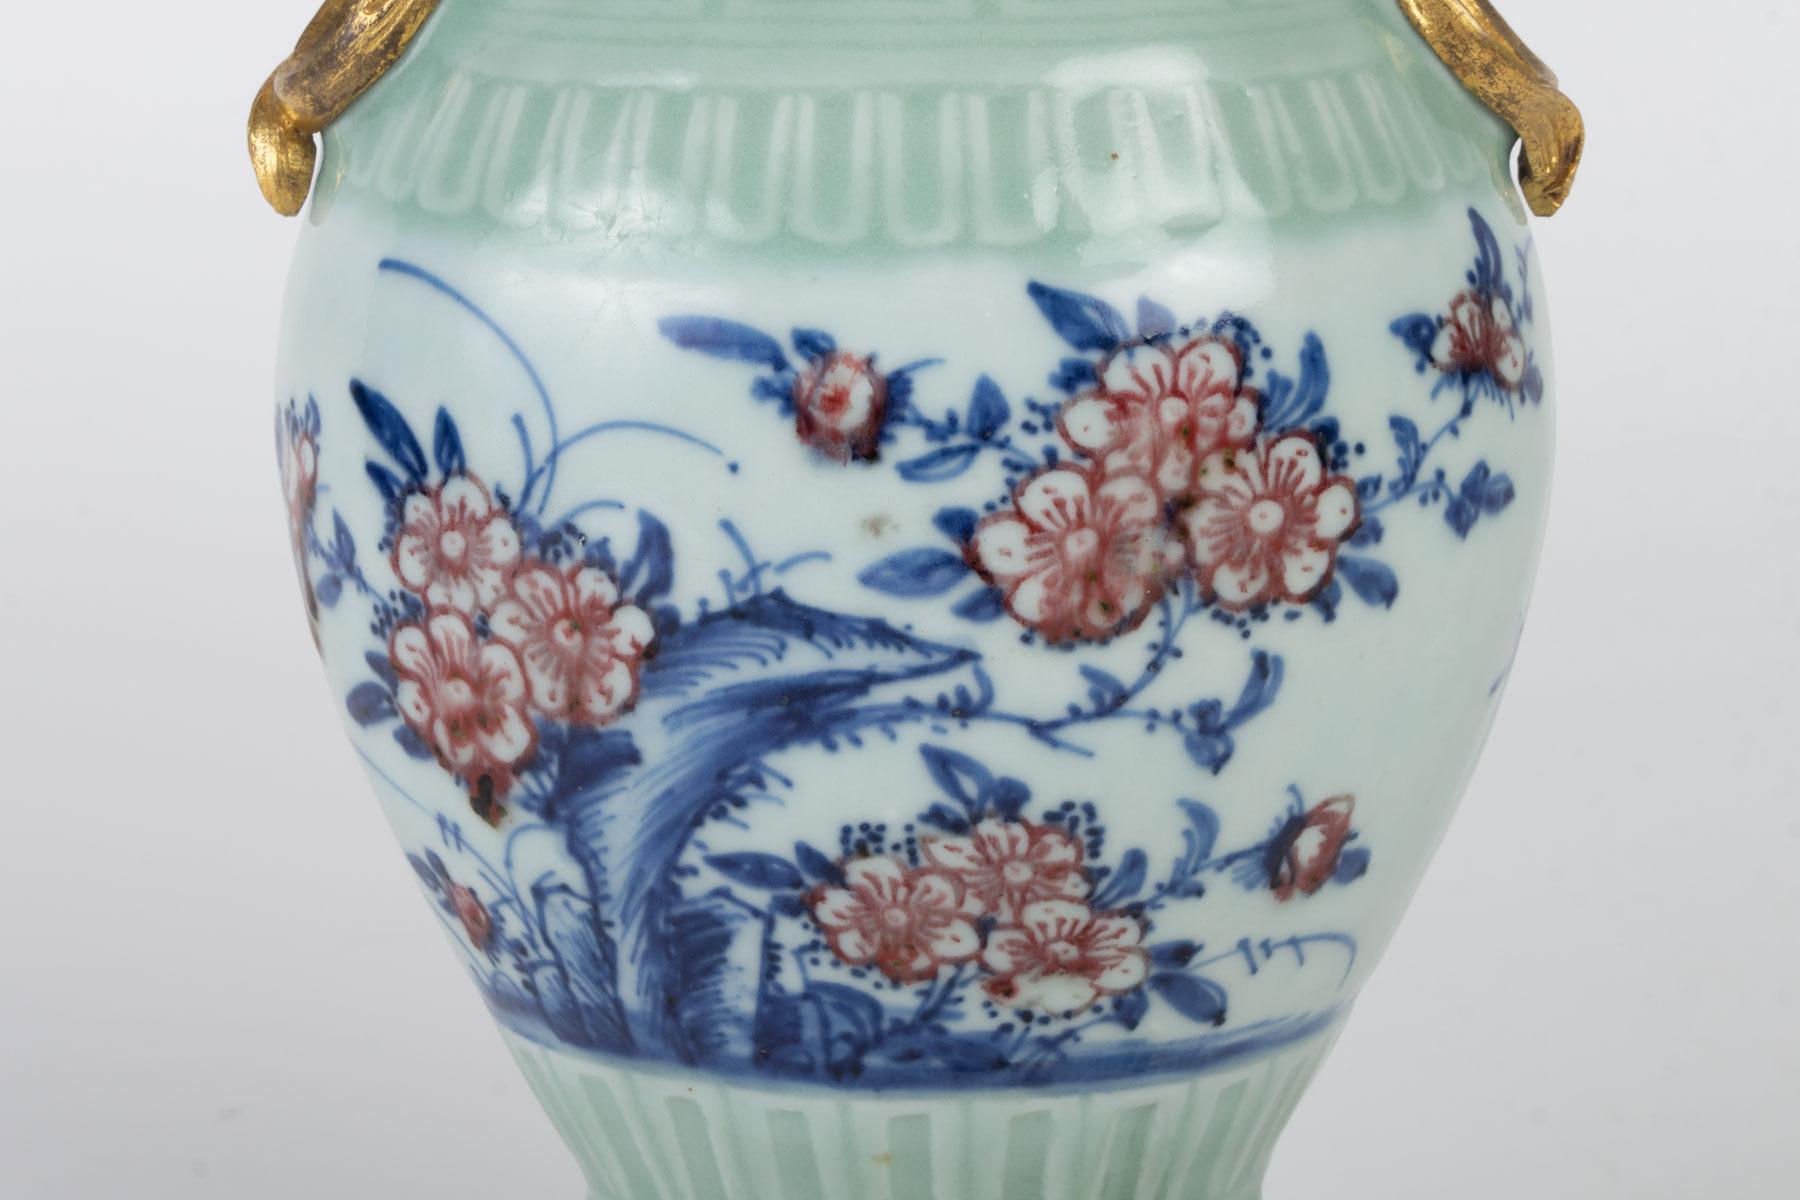 Chinoiserie Mounted Porcelain Vase, Gilt Bronze and Chiselled, 18th Century